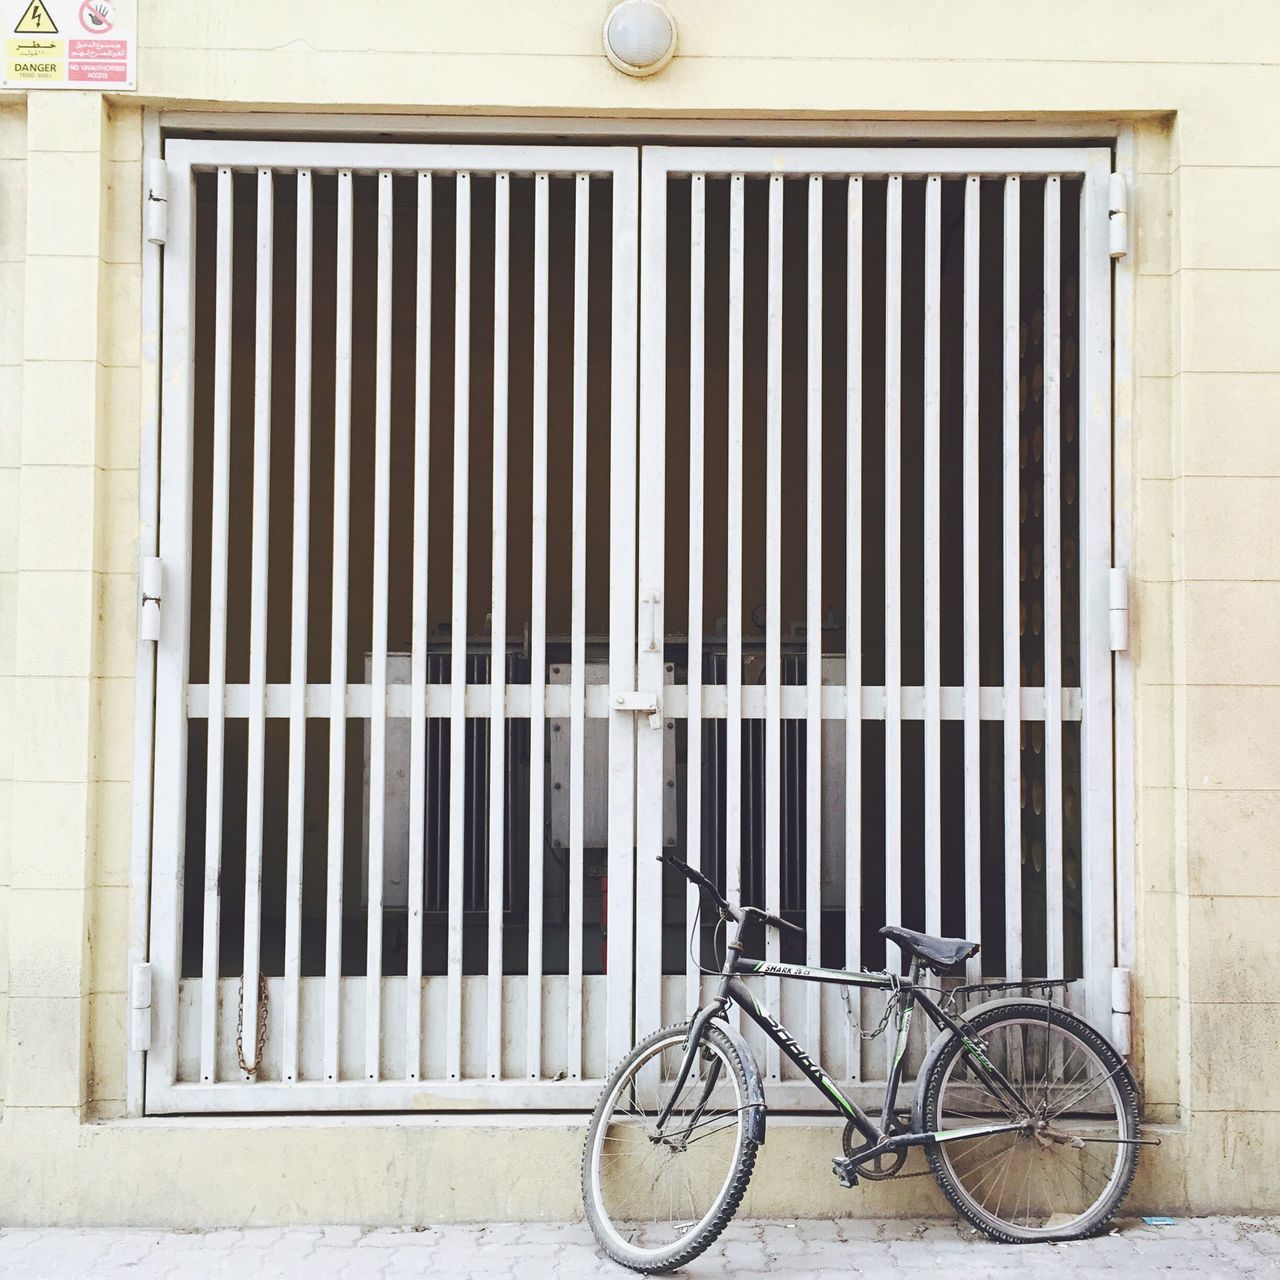 building exterior, architecture, built structure, bicycle, metal, wall - building feature, closed, protection, wall, stationary, safety, pattern, brick wall, day, no people, outdoors, security, window, parked, building